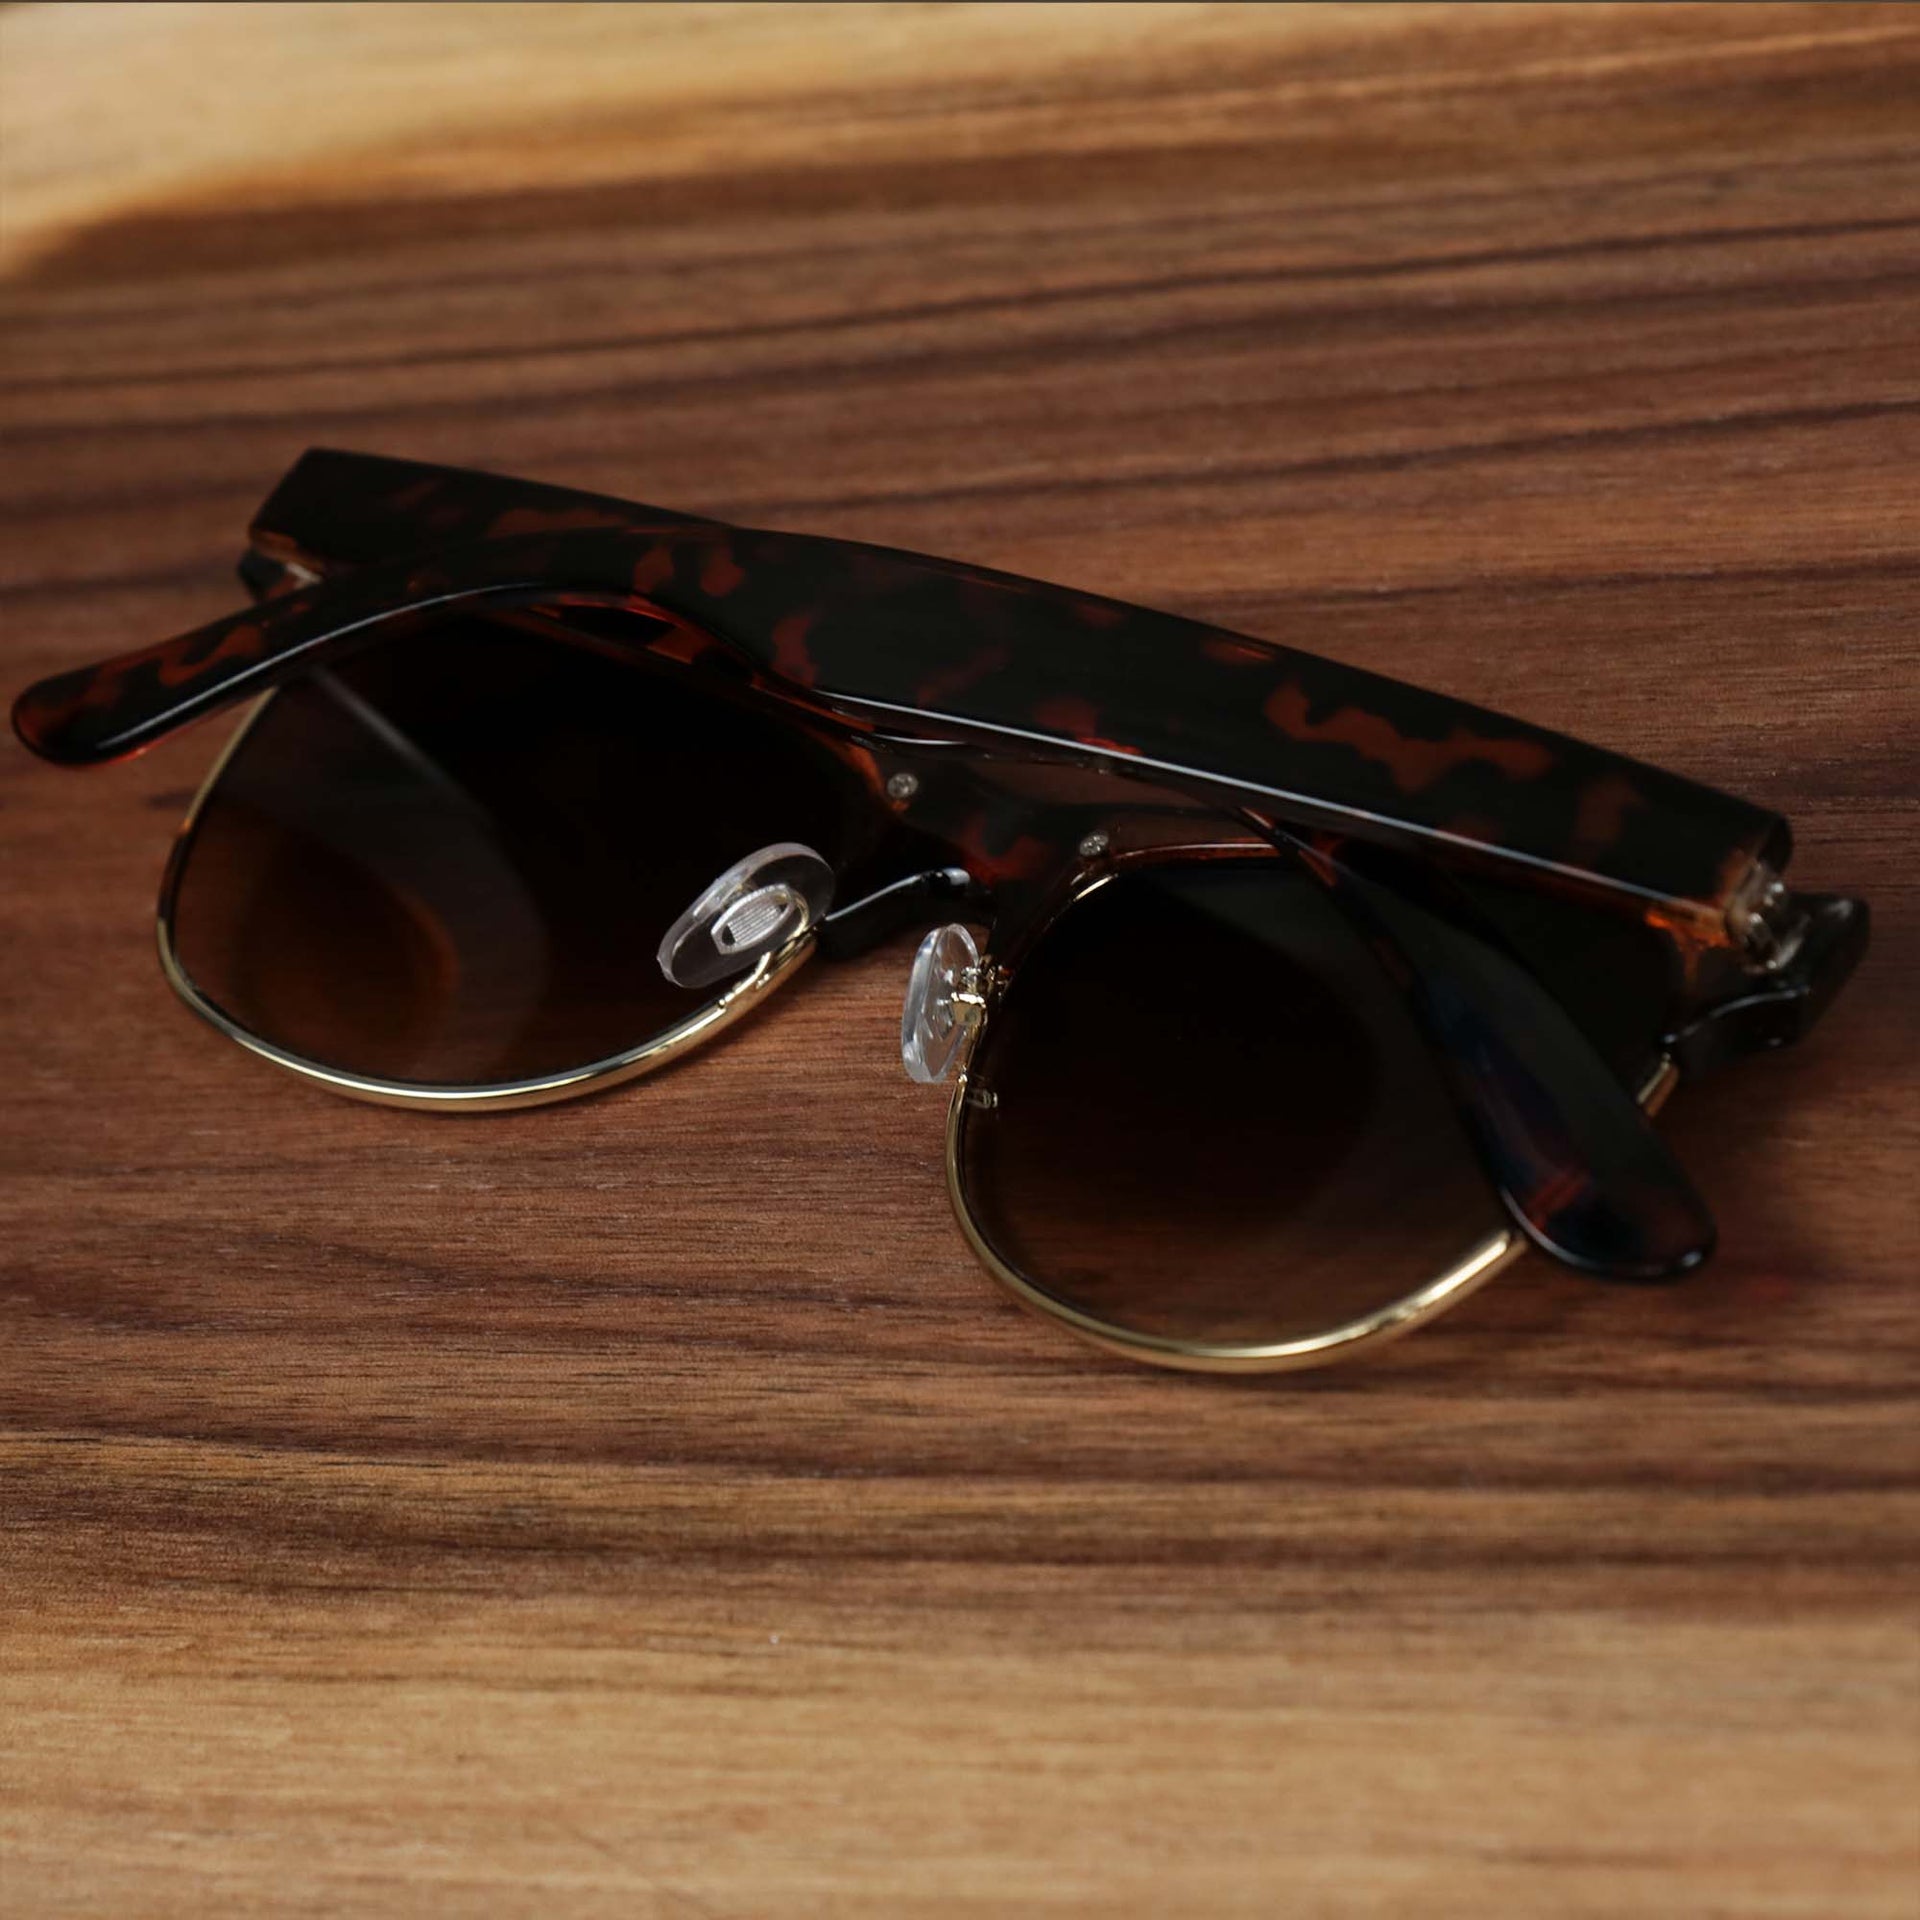 The Thick Top and Metal Bottom Frame Brown Lens Sunglasses with Tortoise Frame folded up